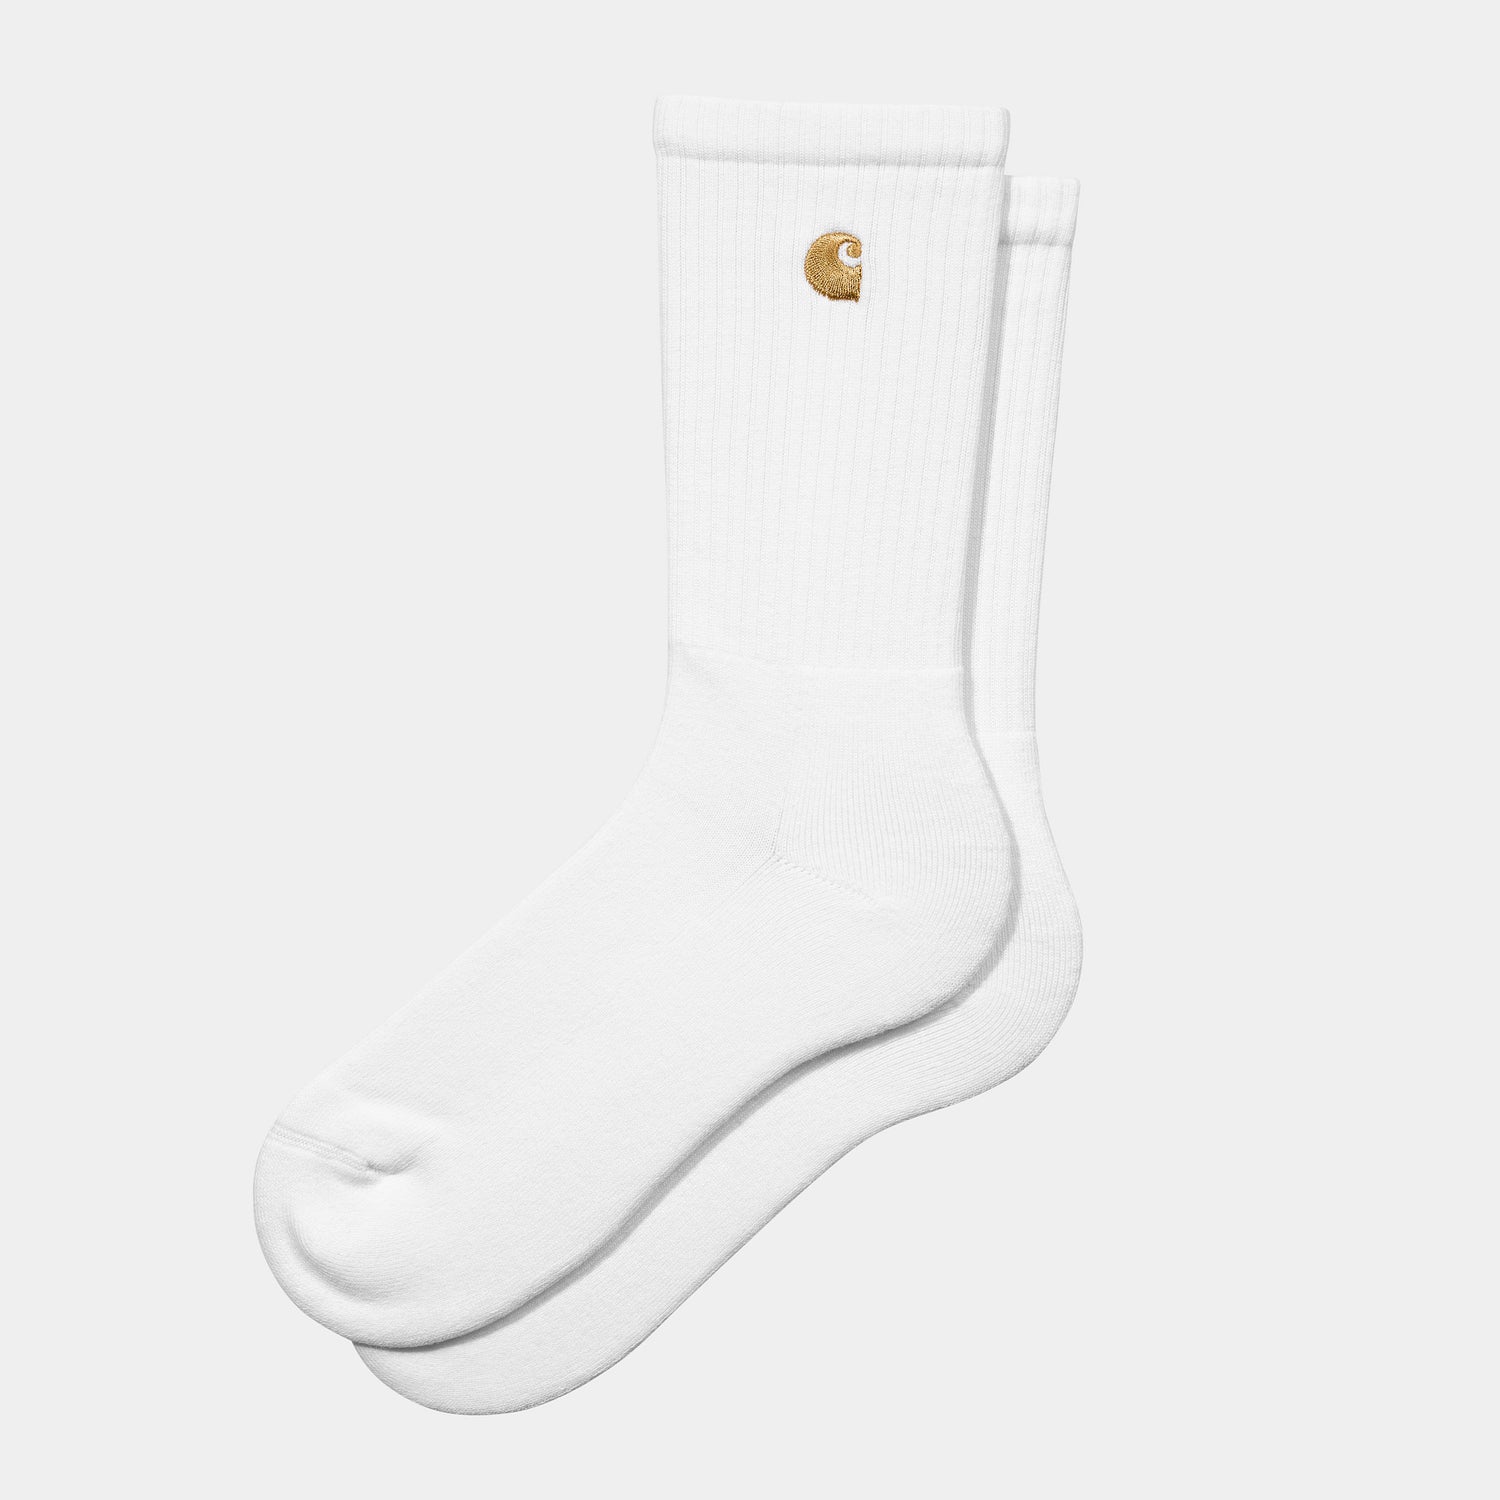 paire de chaussettes blanches Carhartt chase